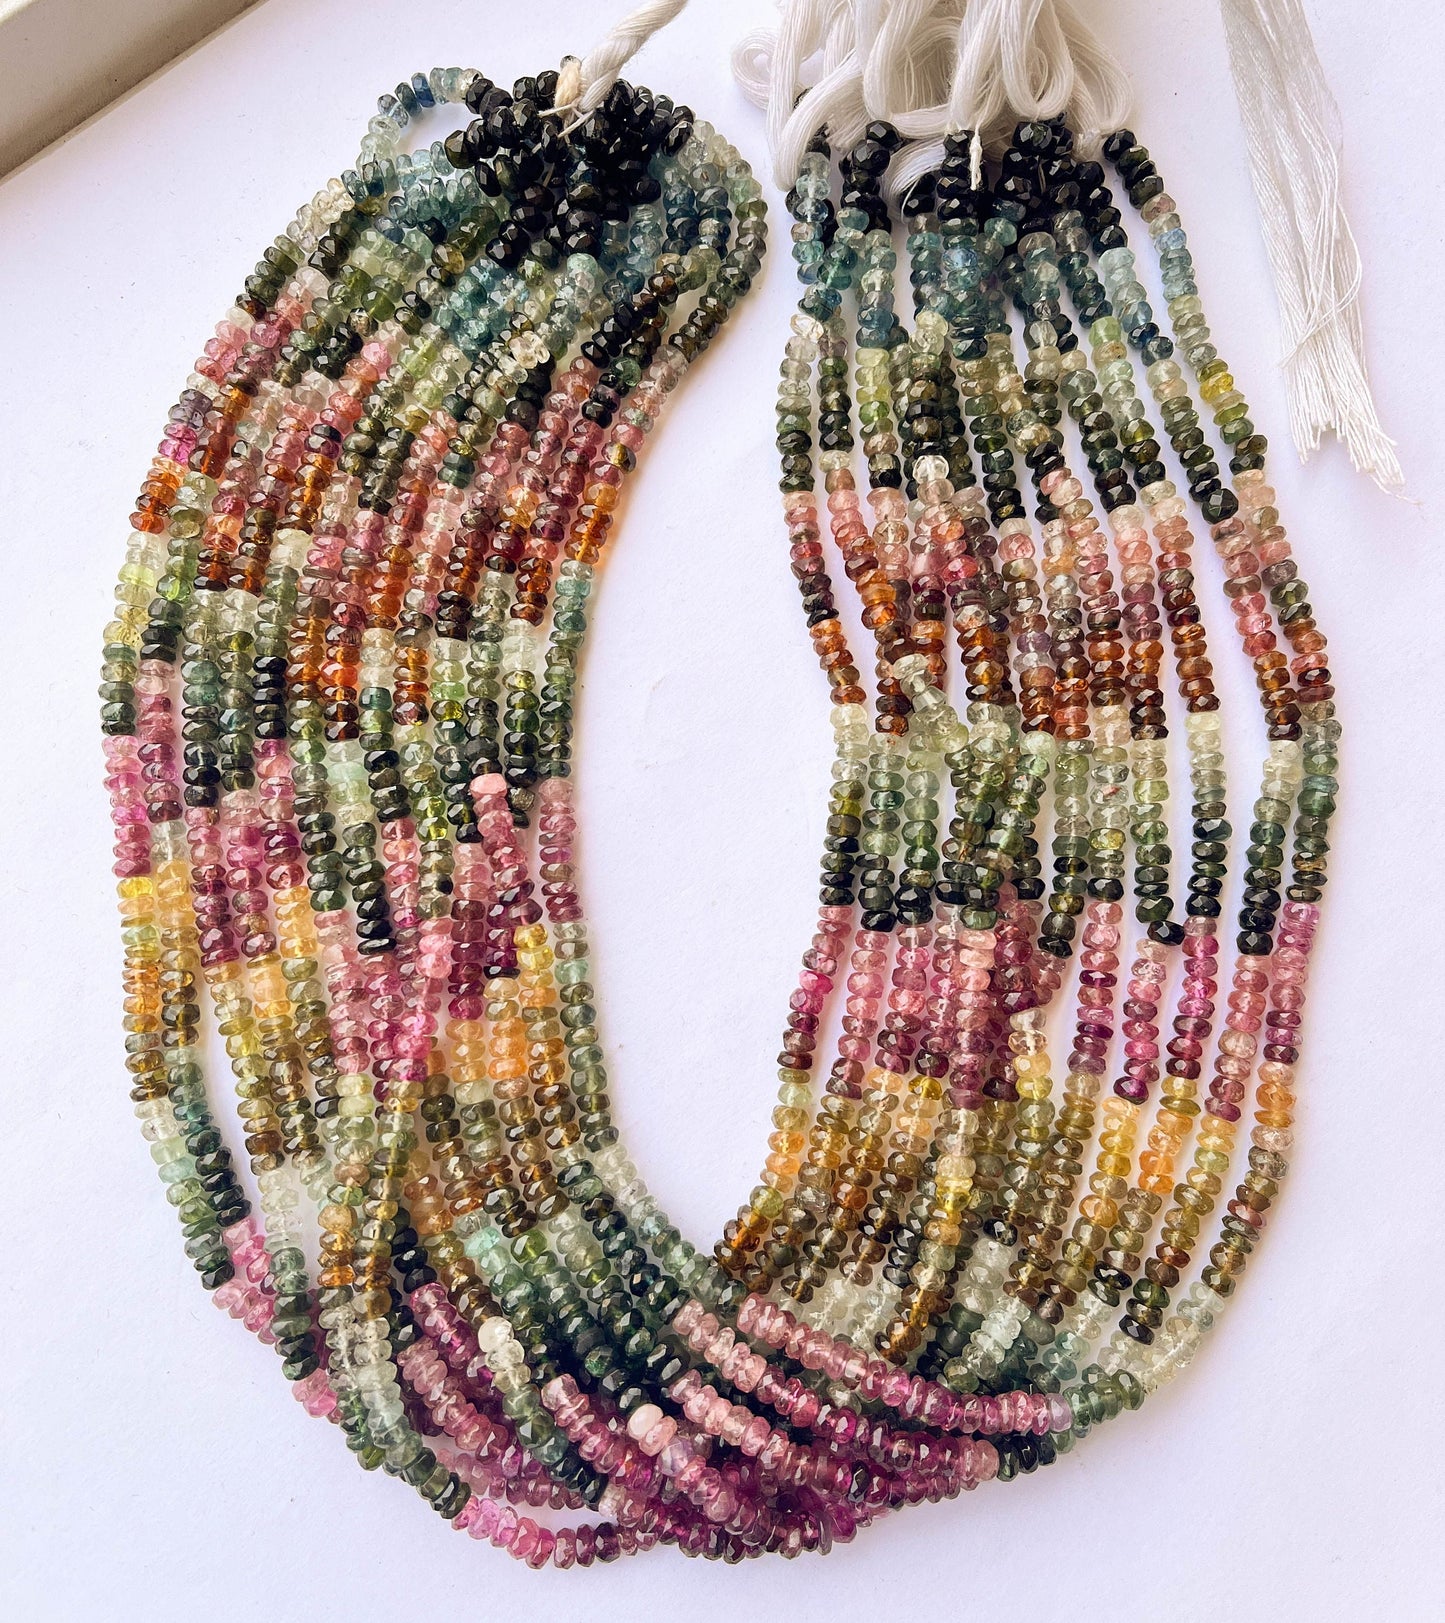 MULTI TOURMALINE Rondelle Faceted Beads